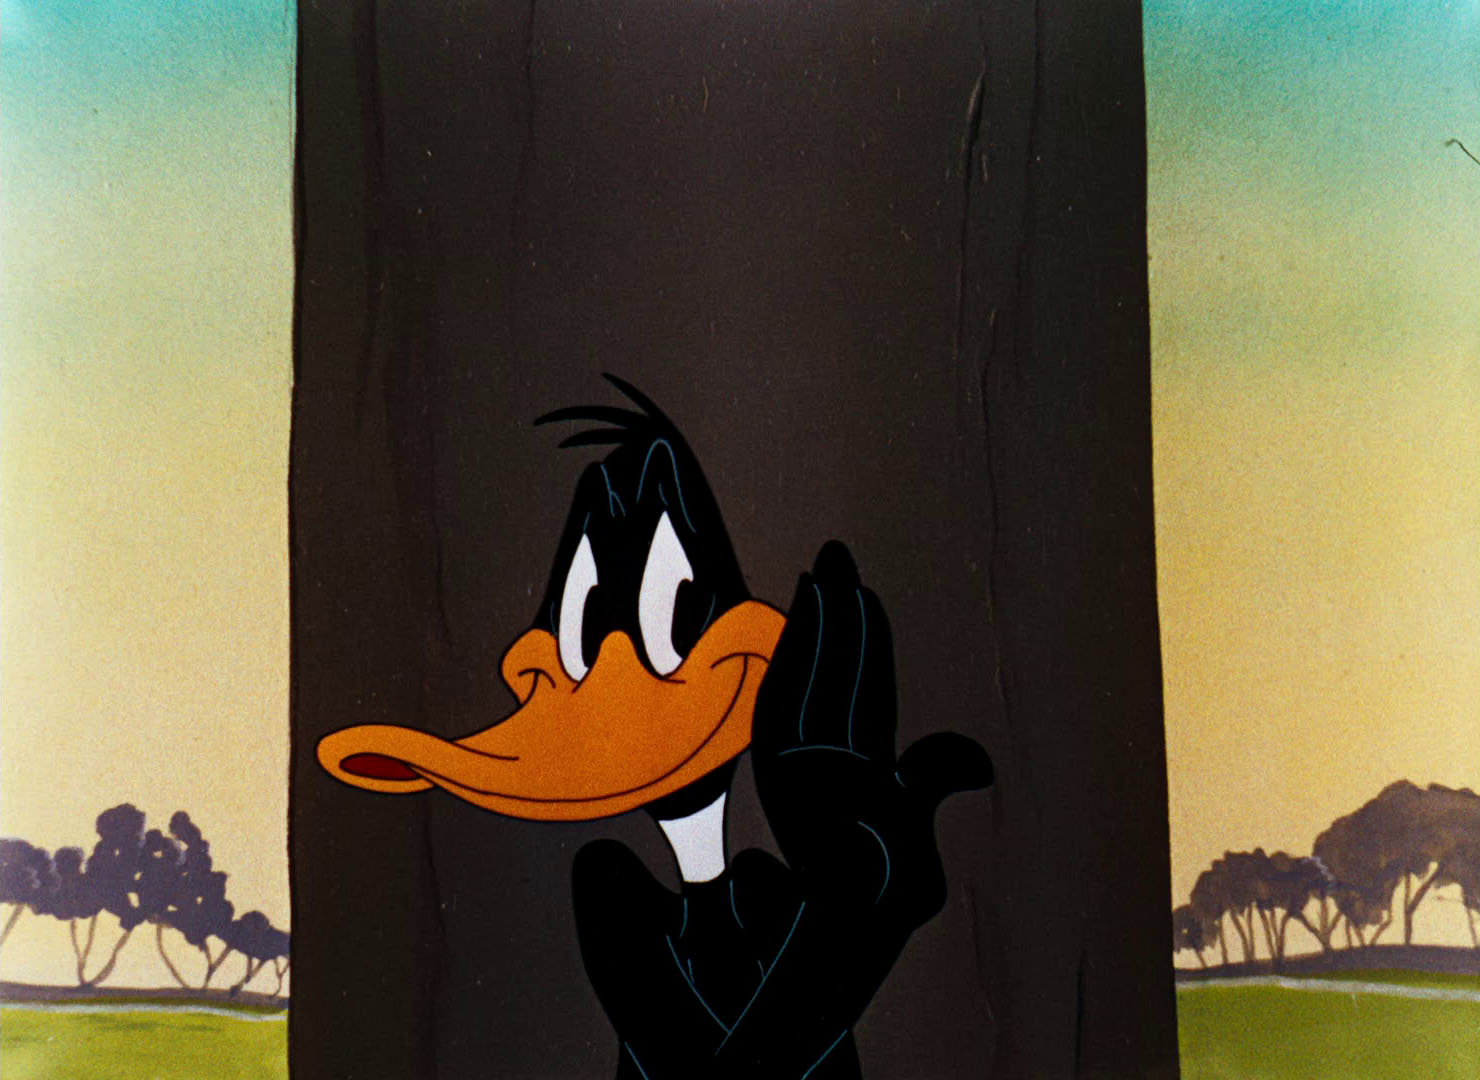 Looney Tunes Pictures: "What Makes Daffy Duck" .